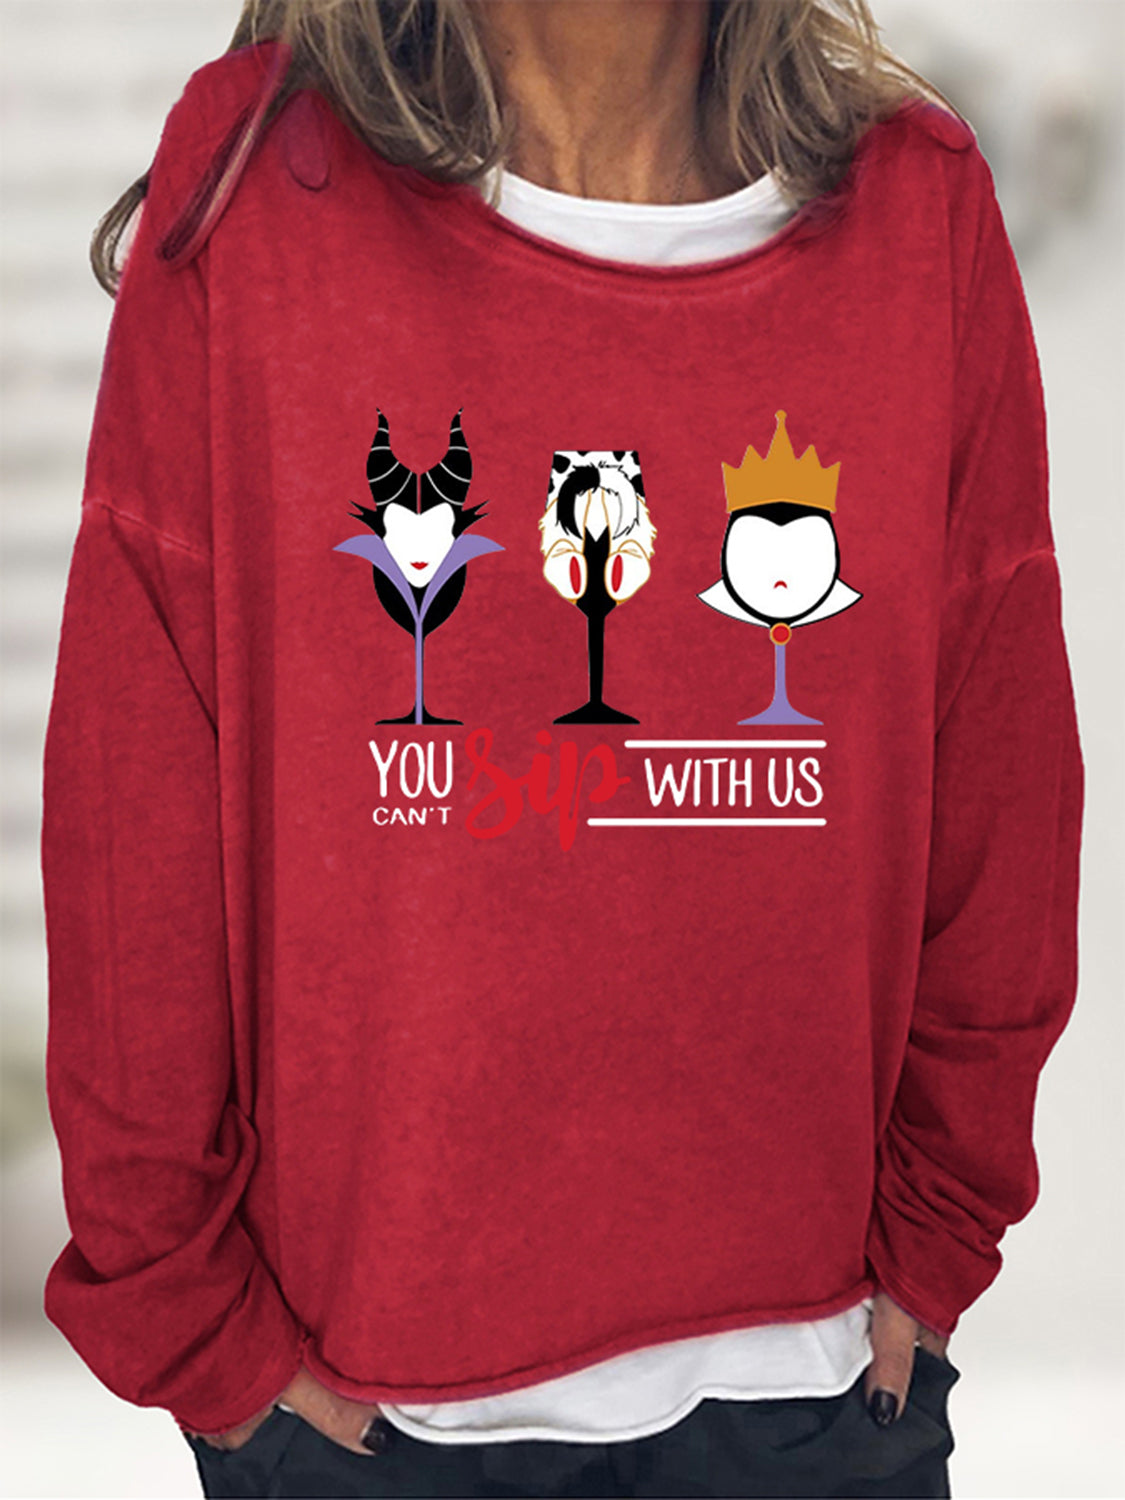 YOU CAN’T SIP WITH US Graphic Sweatshirt - Red / S - T-Shirts - Shirts & Tops - 10 - 2024